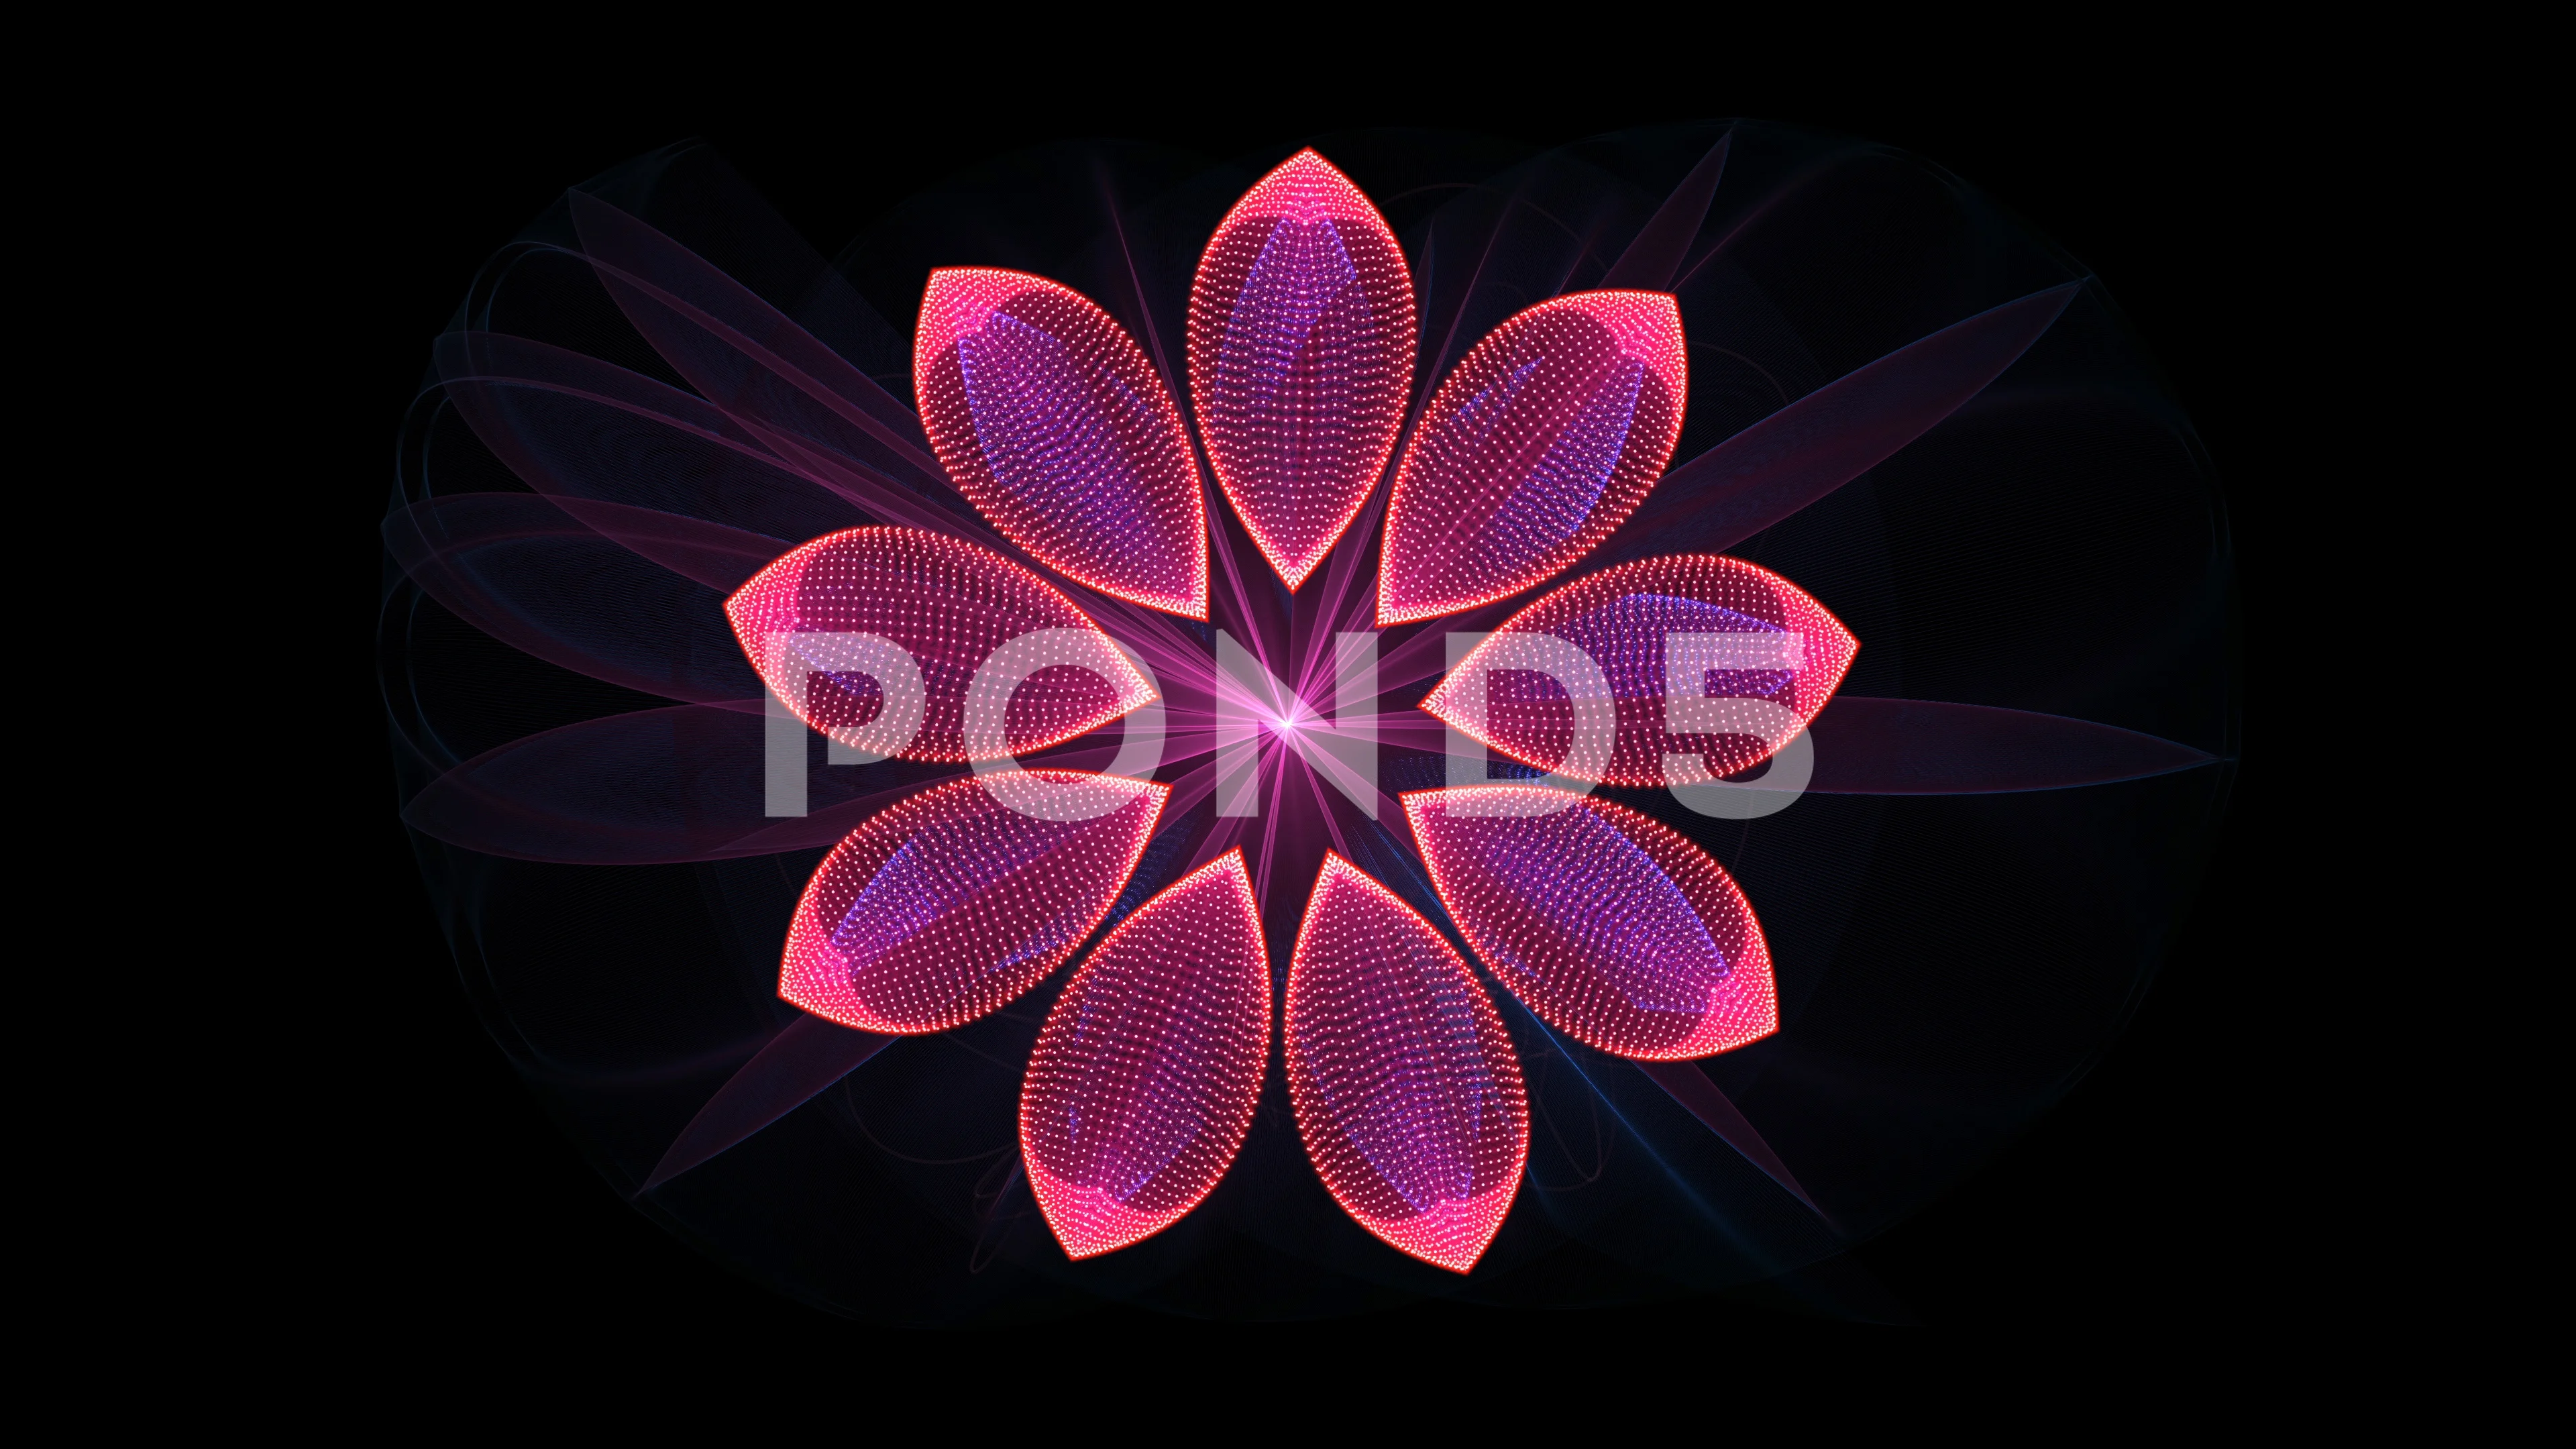 Flower Animation Stock Footage ~ Royalty Free Stock Videos | Pond5